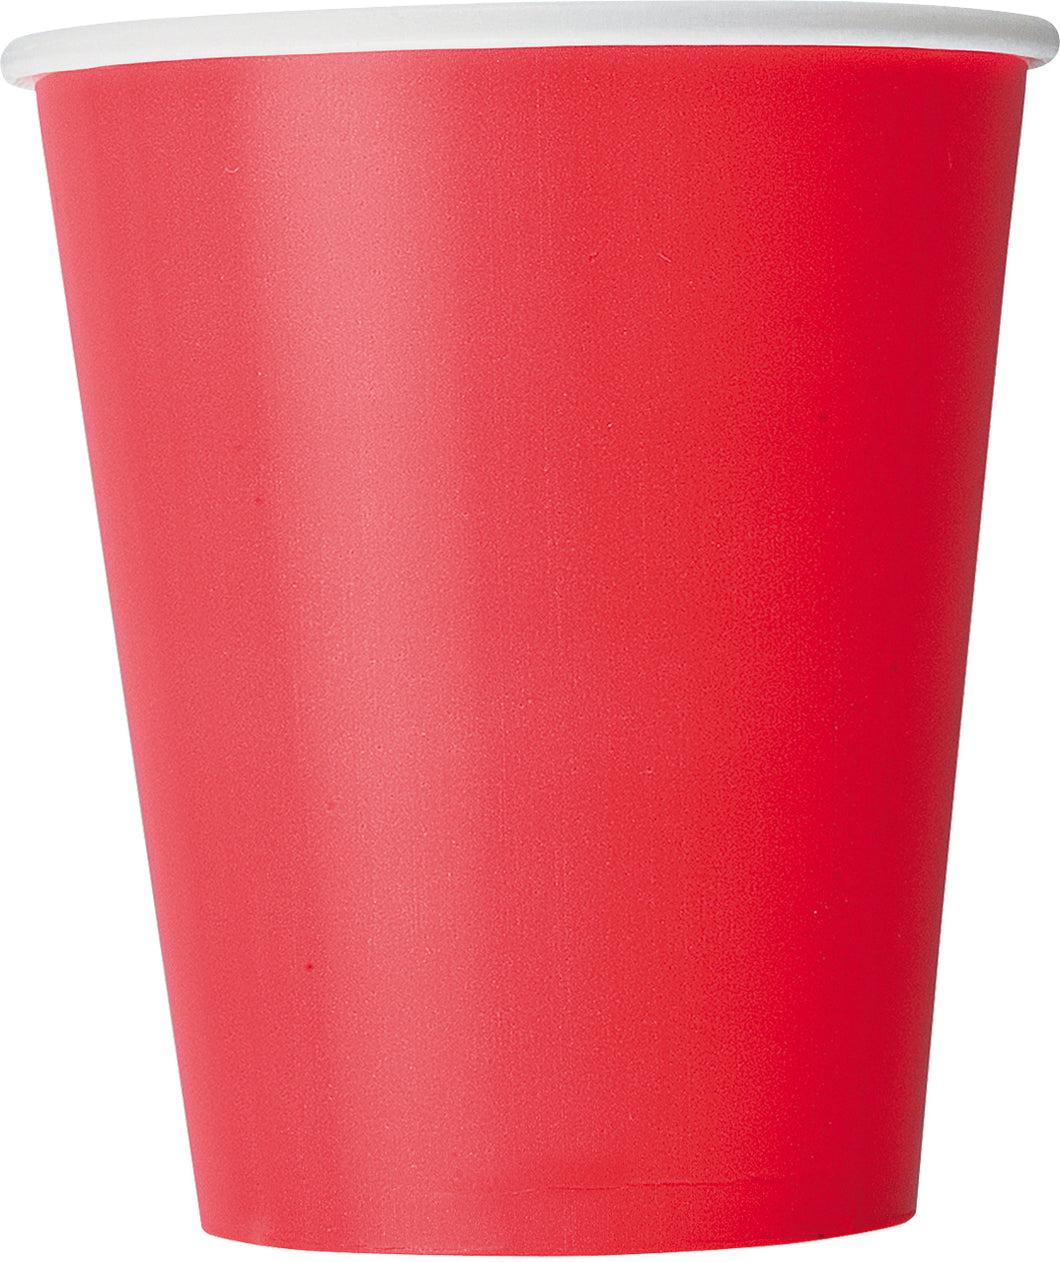 RUBY RED DRINK 8 x 9oz PAPER CUPS